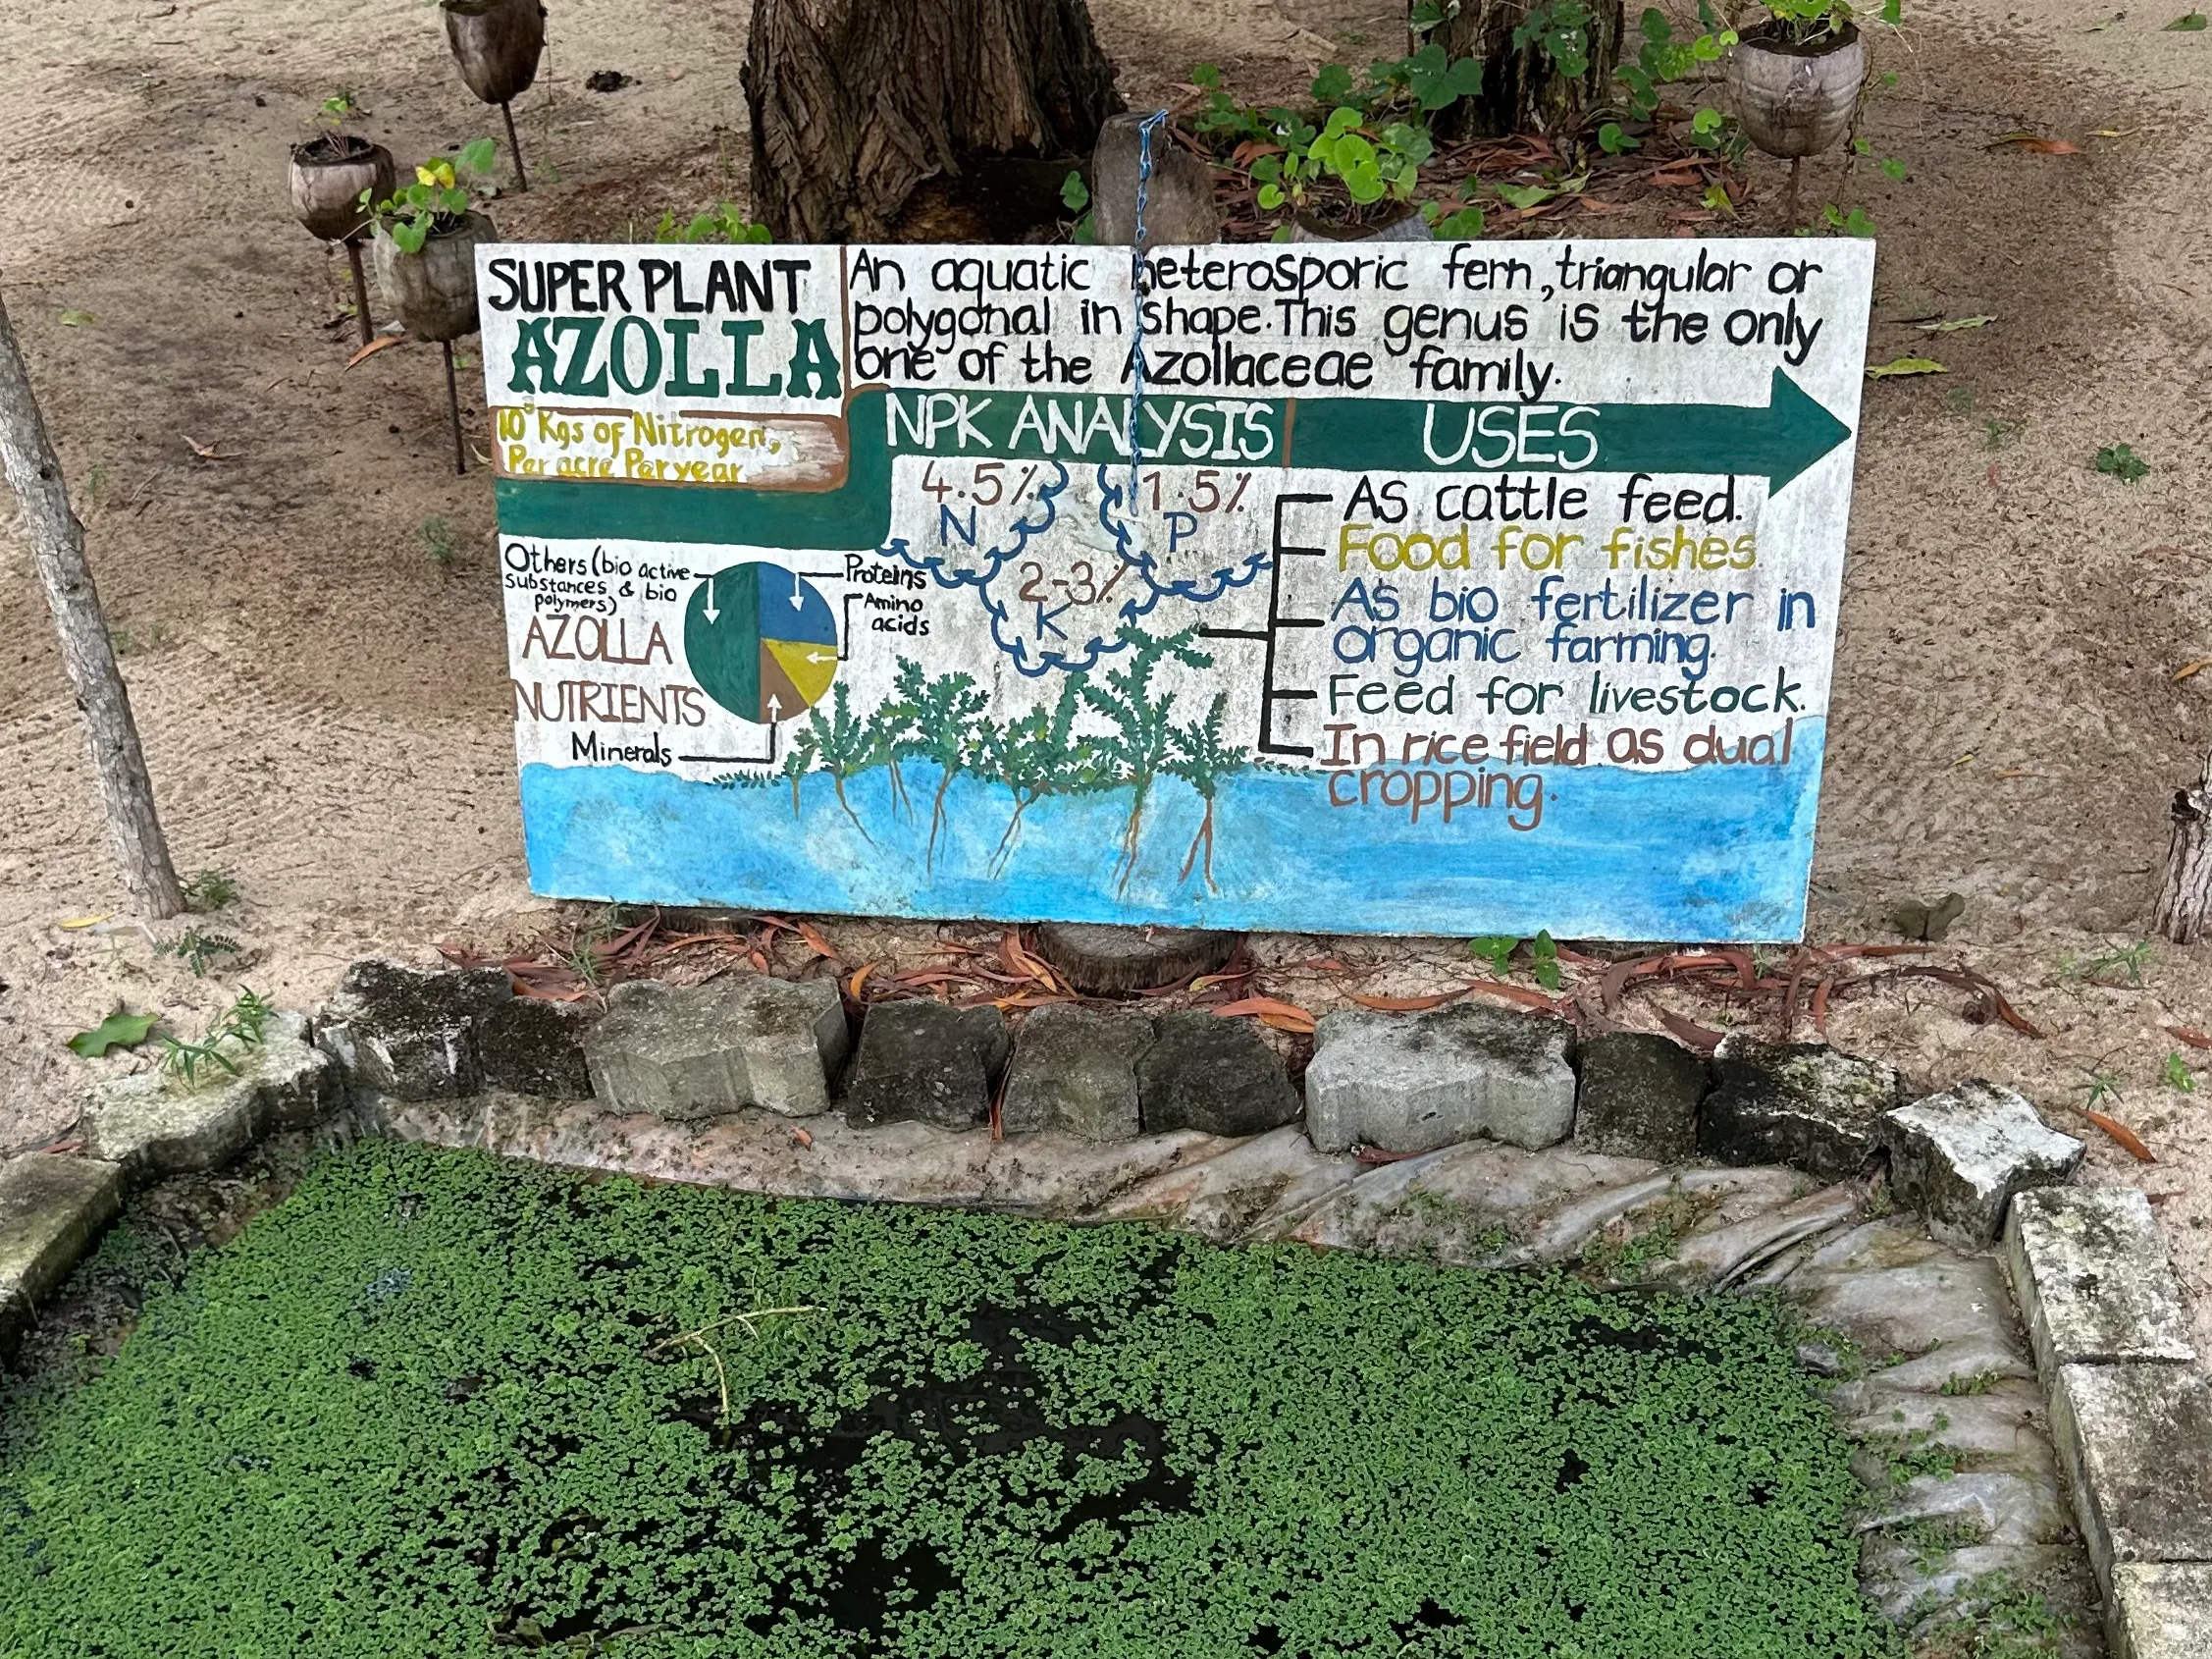 pond with azolla plant in it and info board